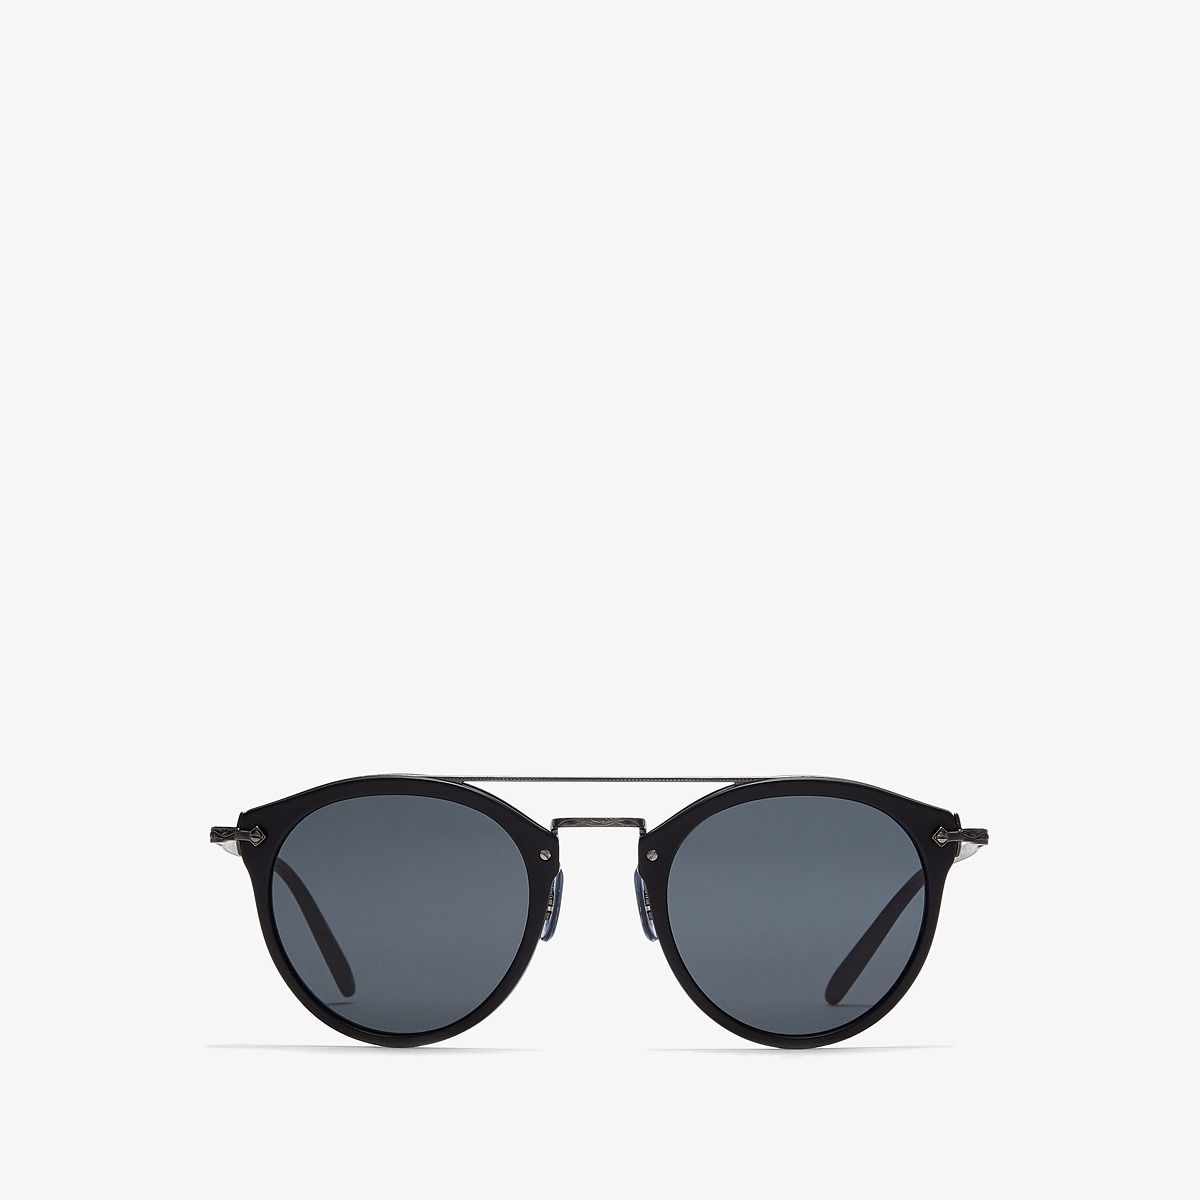 Oliver Peoples - Remick (Semi-Matte Black/Antique Pewter/Grey) Fashion Sunglasses | Zappos